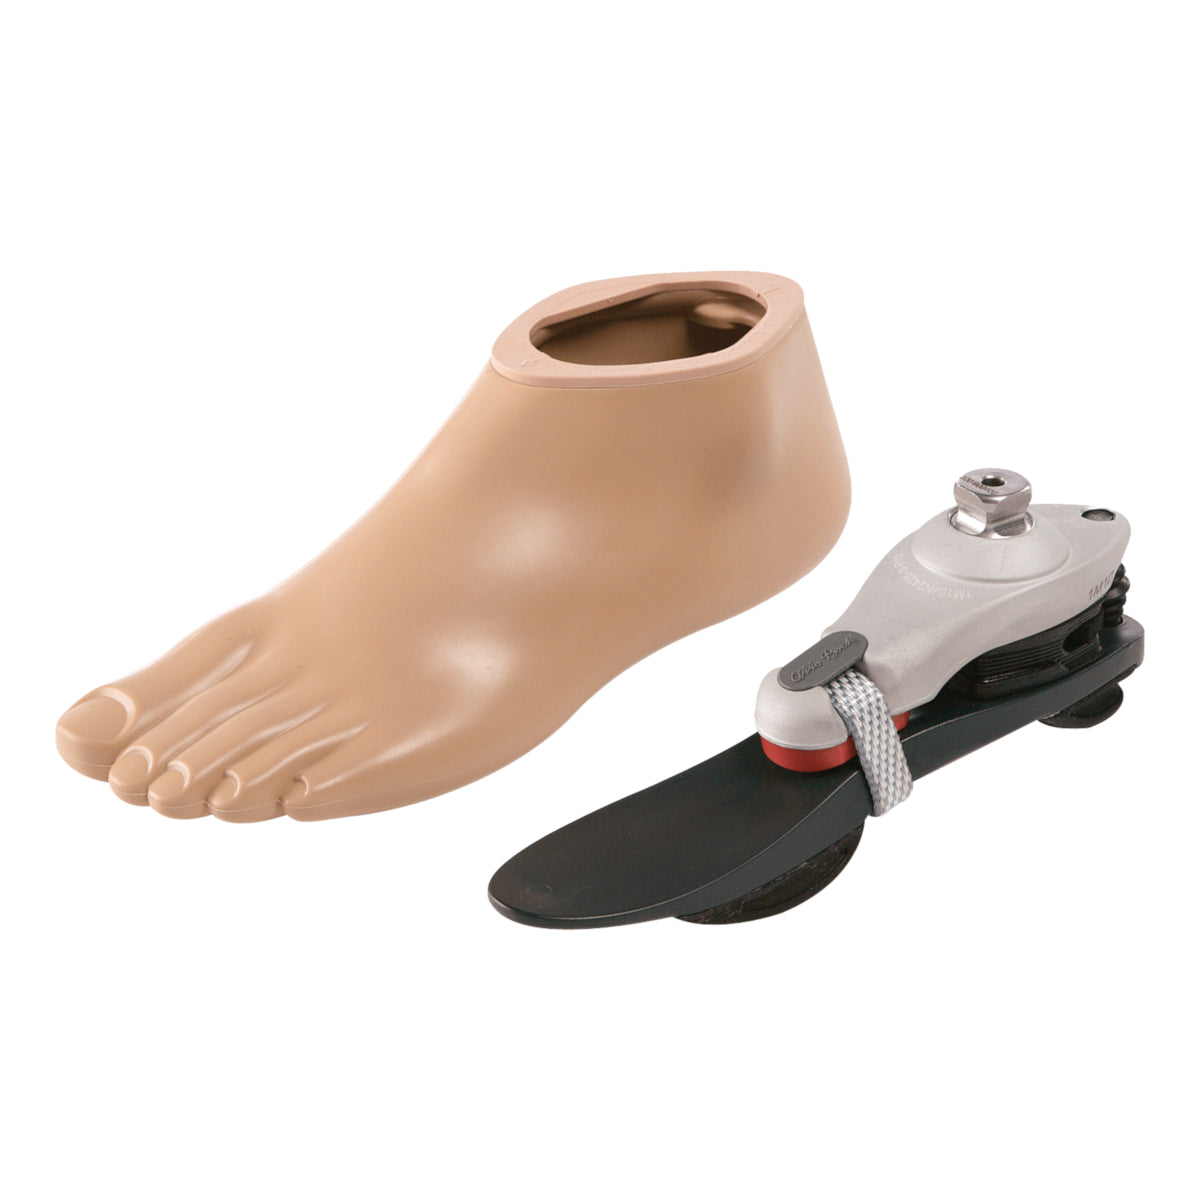 Grace Foot (left/right) - Keel, Footshell and Adapter-Health Care-dealsplant